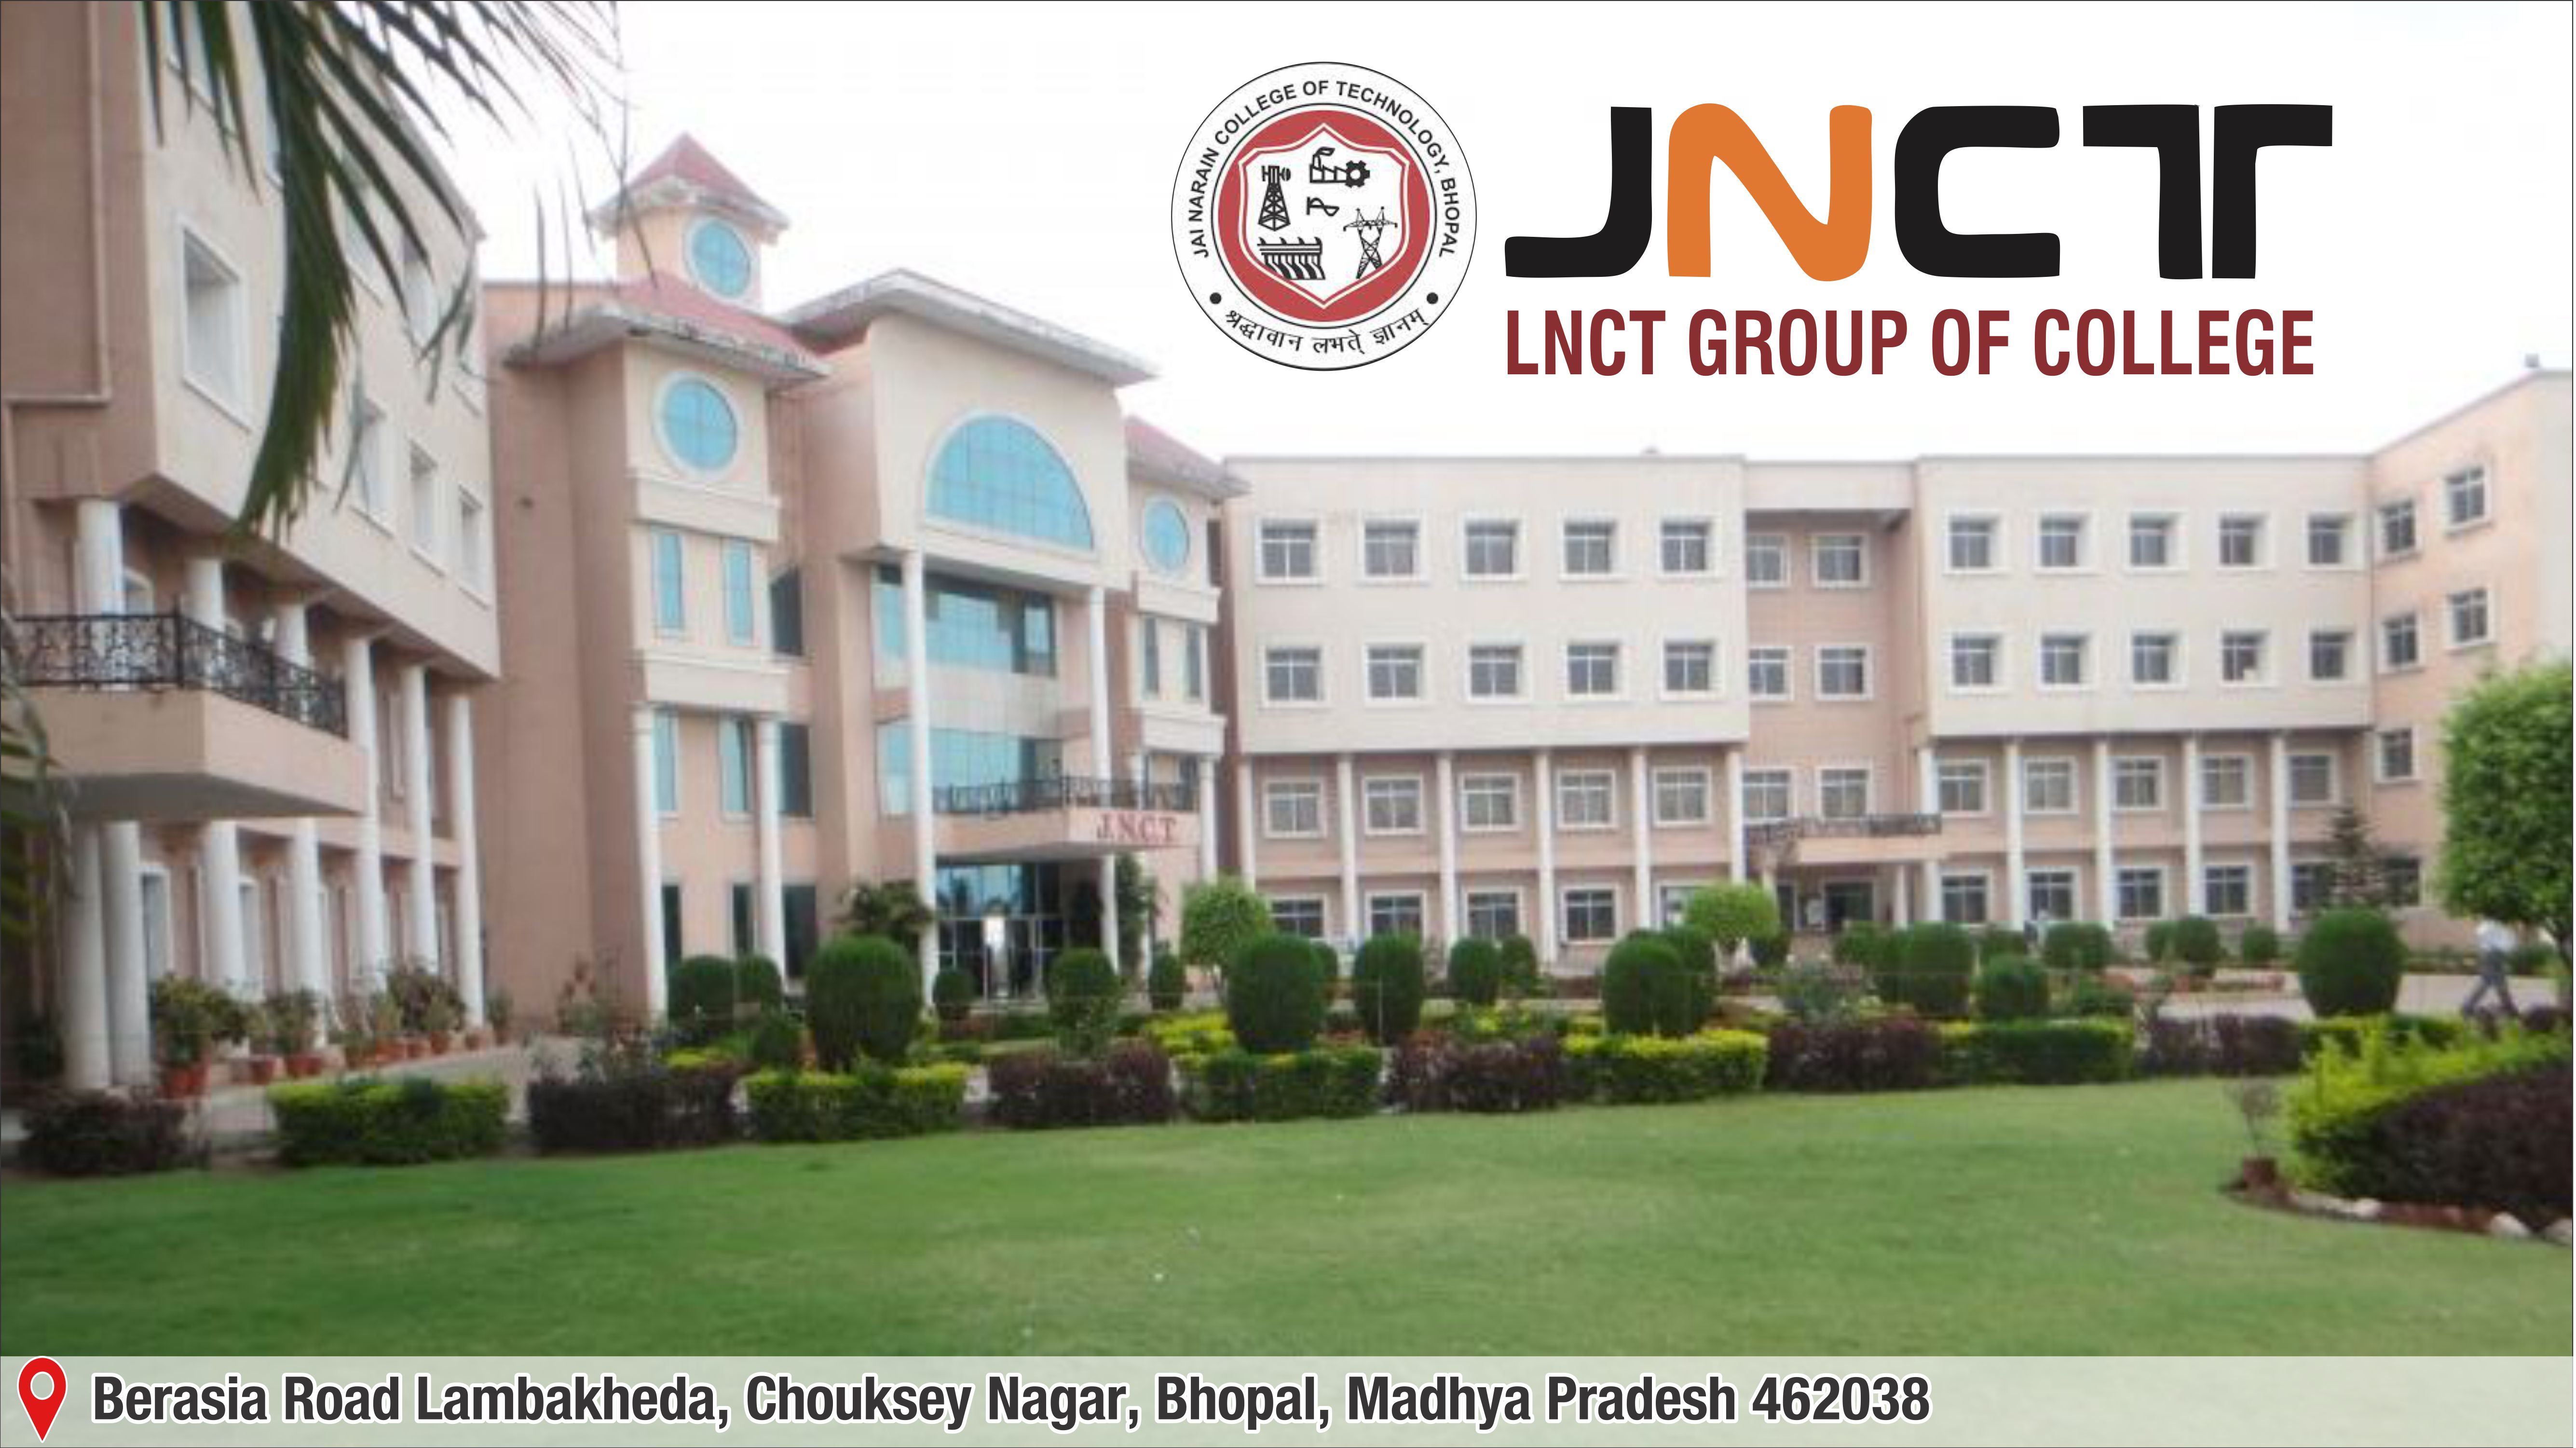 Out Side View of Jai Narain College of Technology (JNCT)